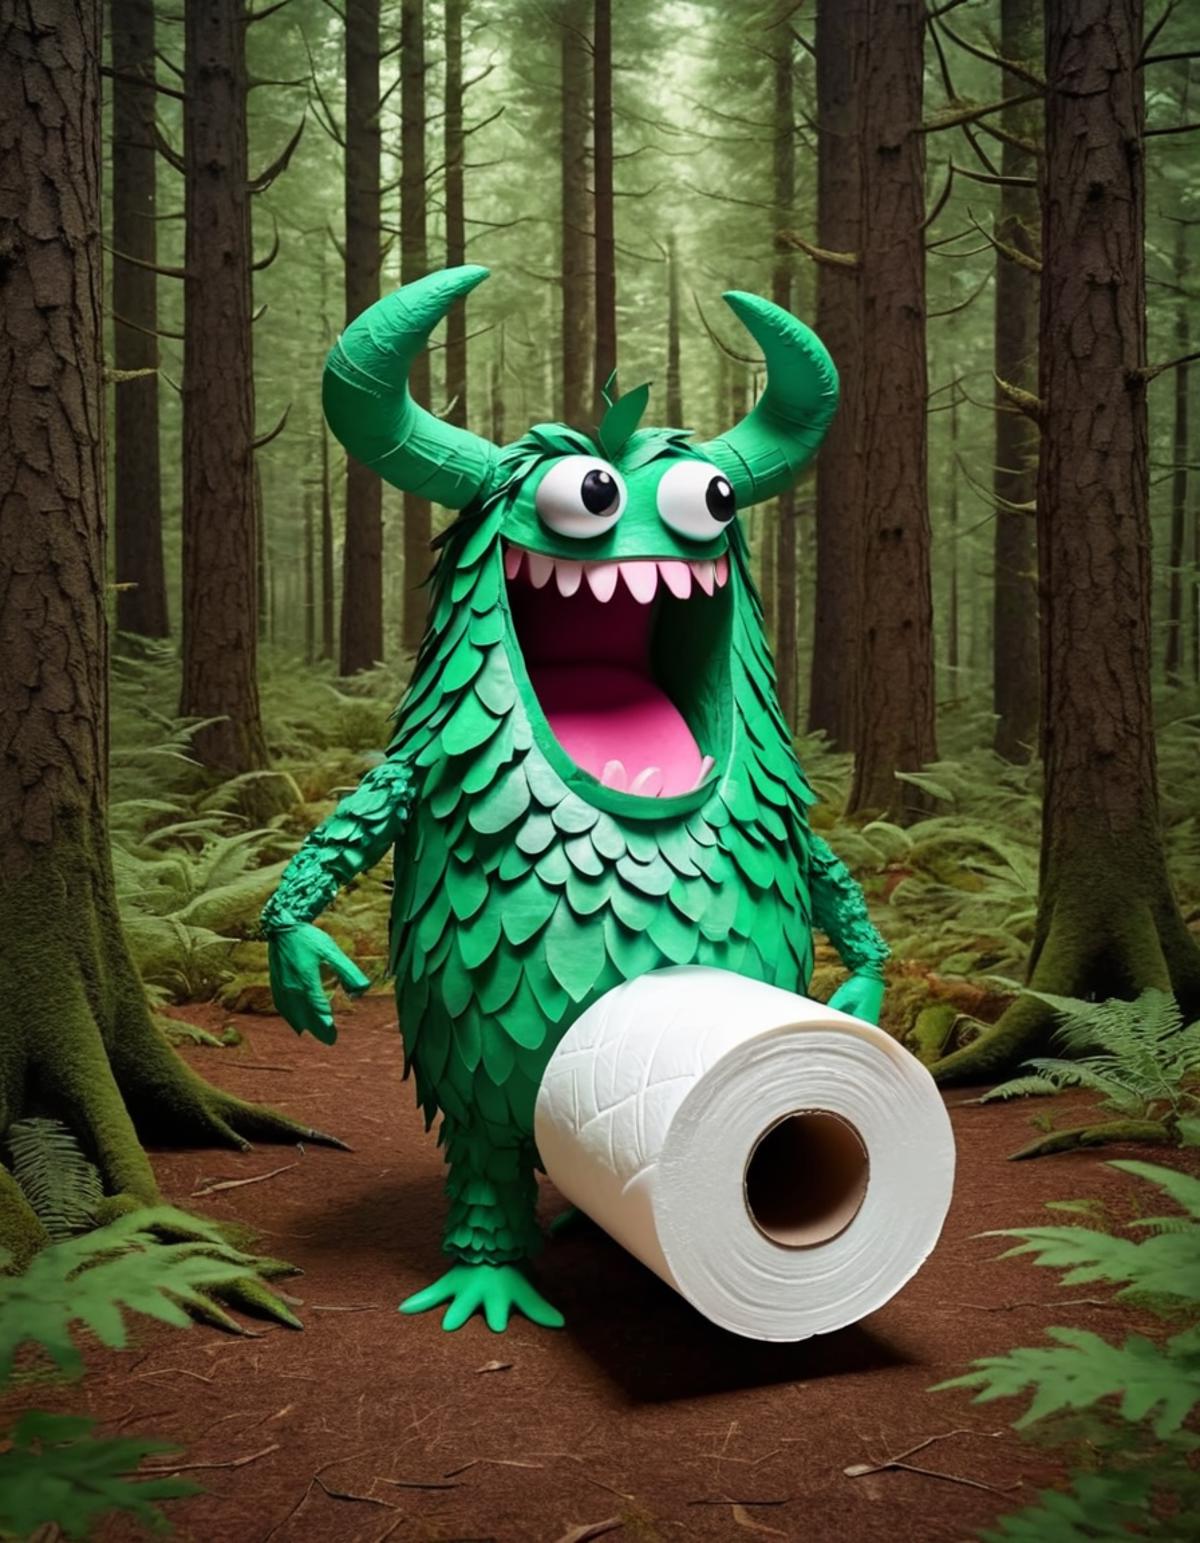 A green monster with horns holding a roll of toilet paper.